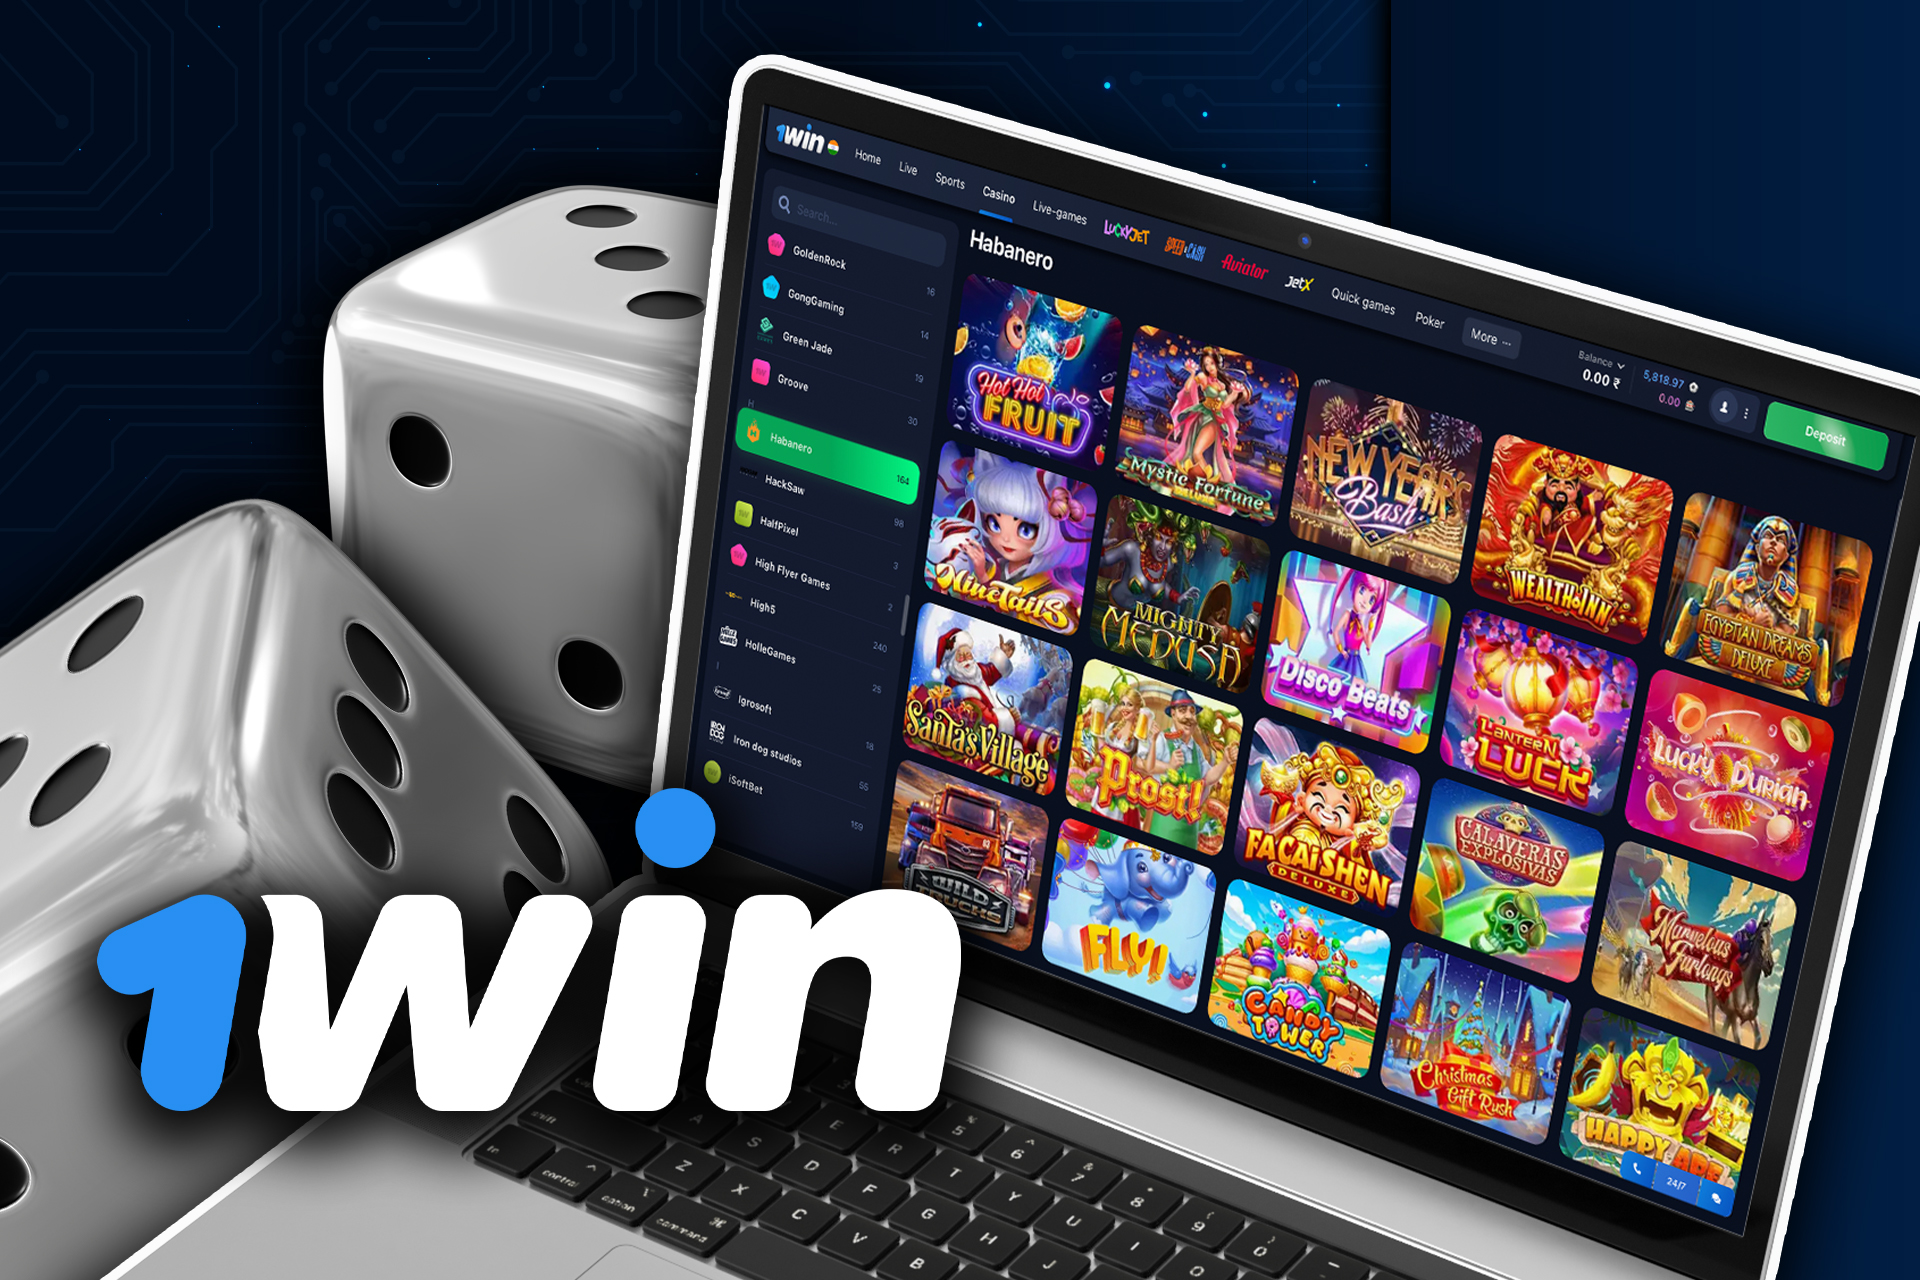 You can find many games from Habanero in the 1win casino.